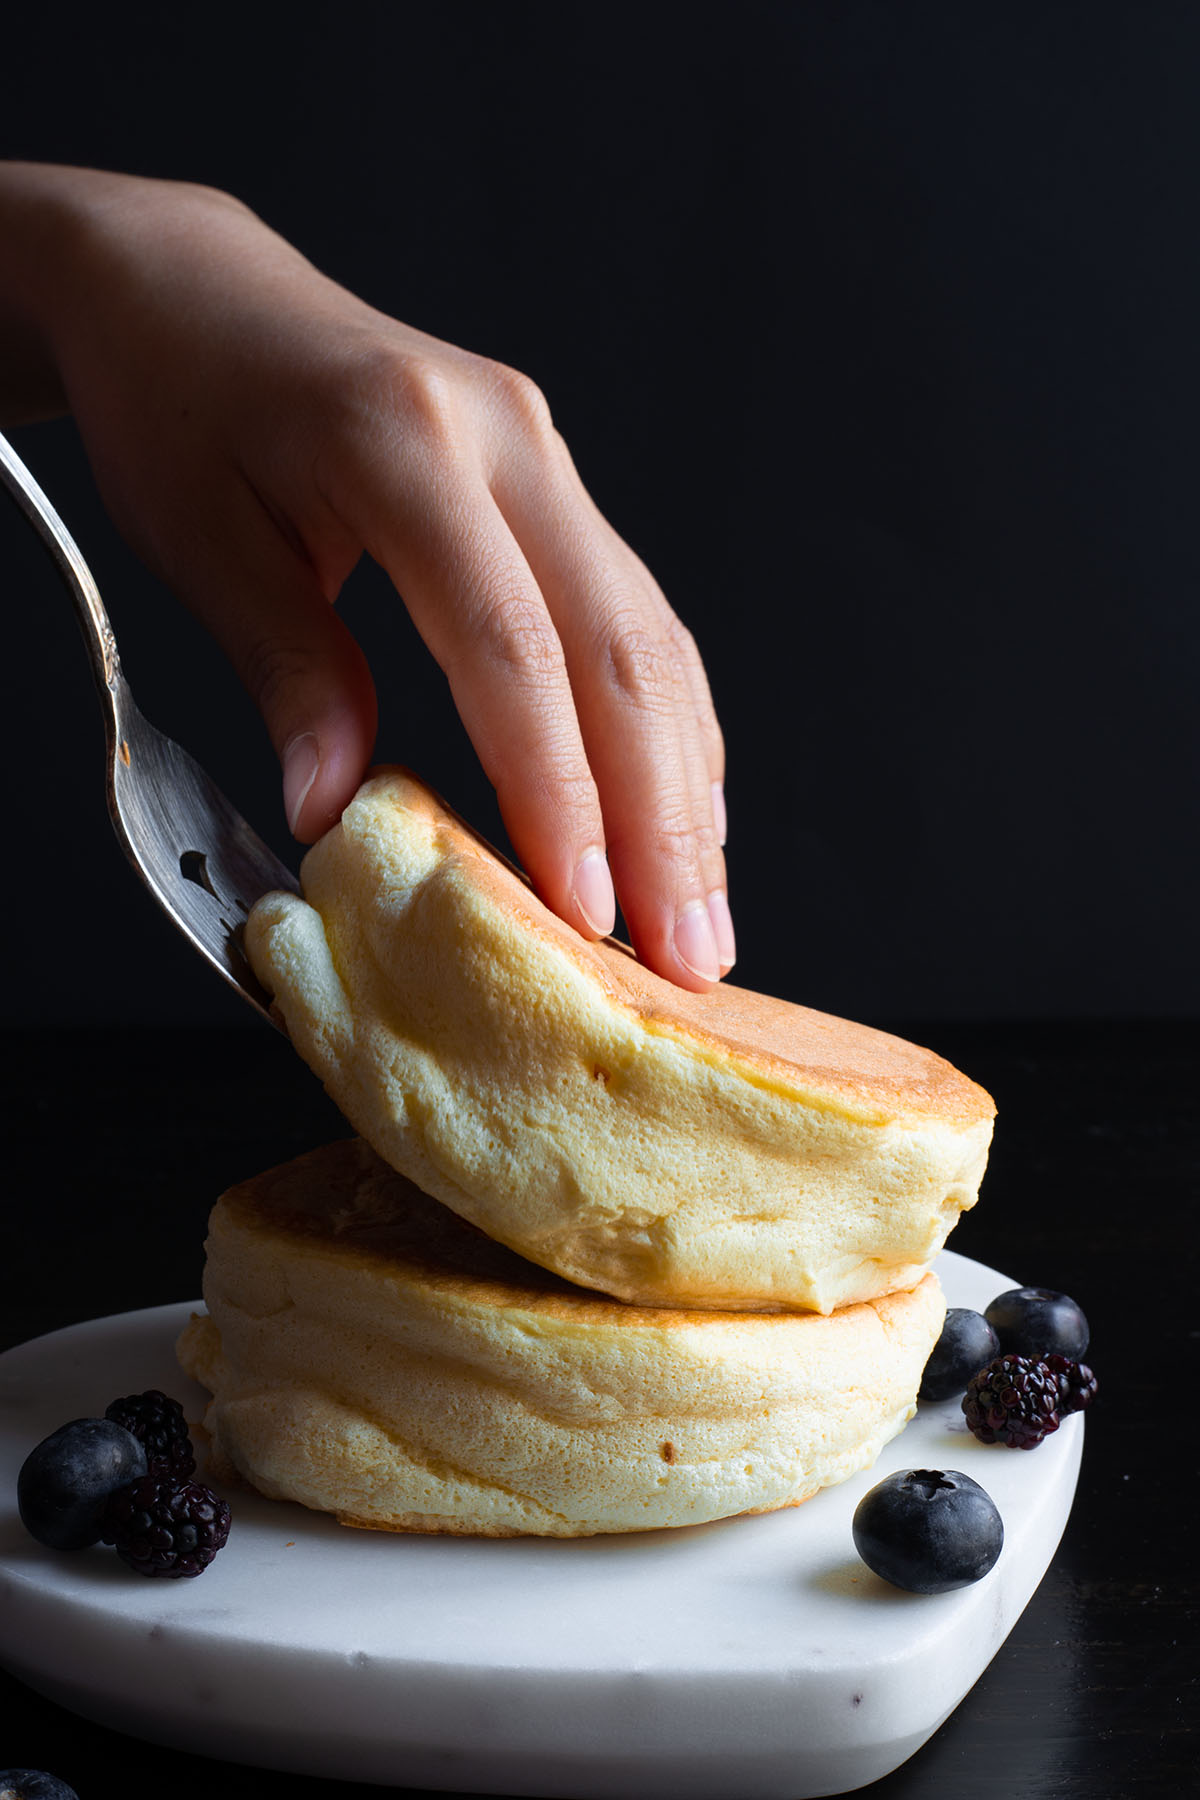 Stacking up our jiggly soufflé pancakes.